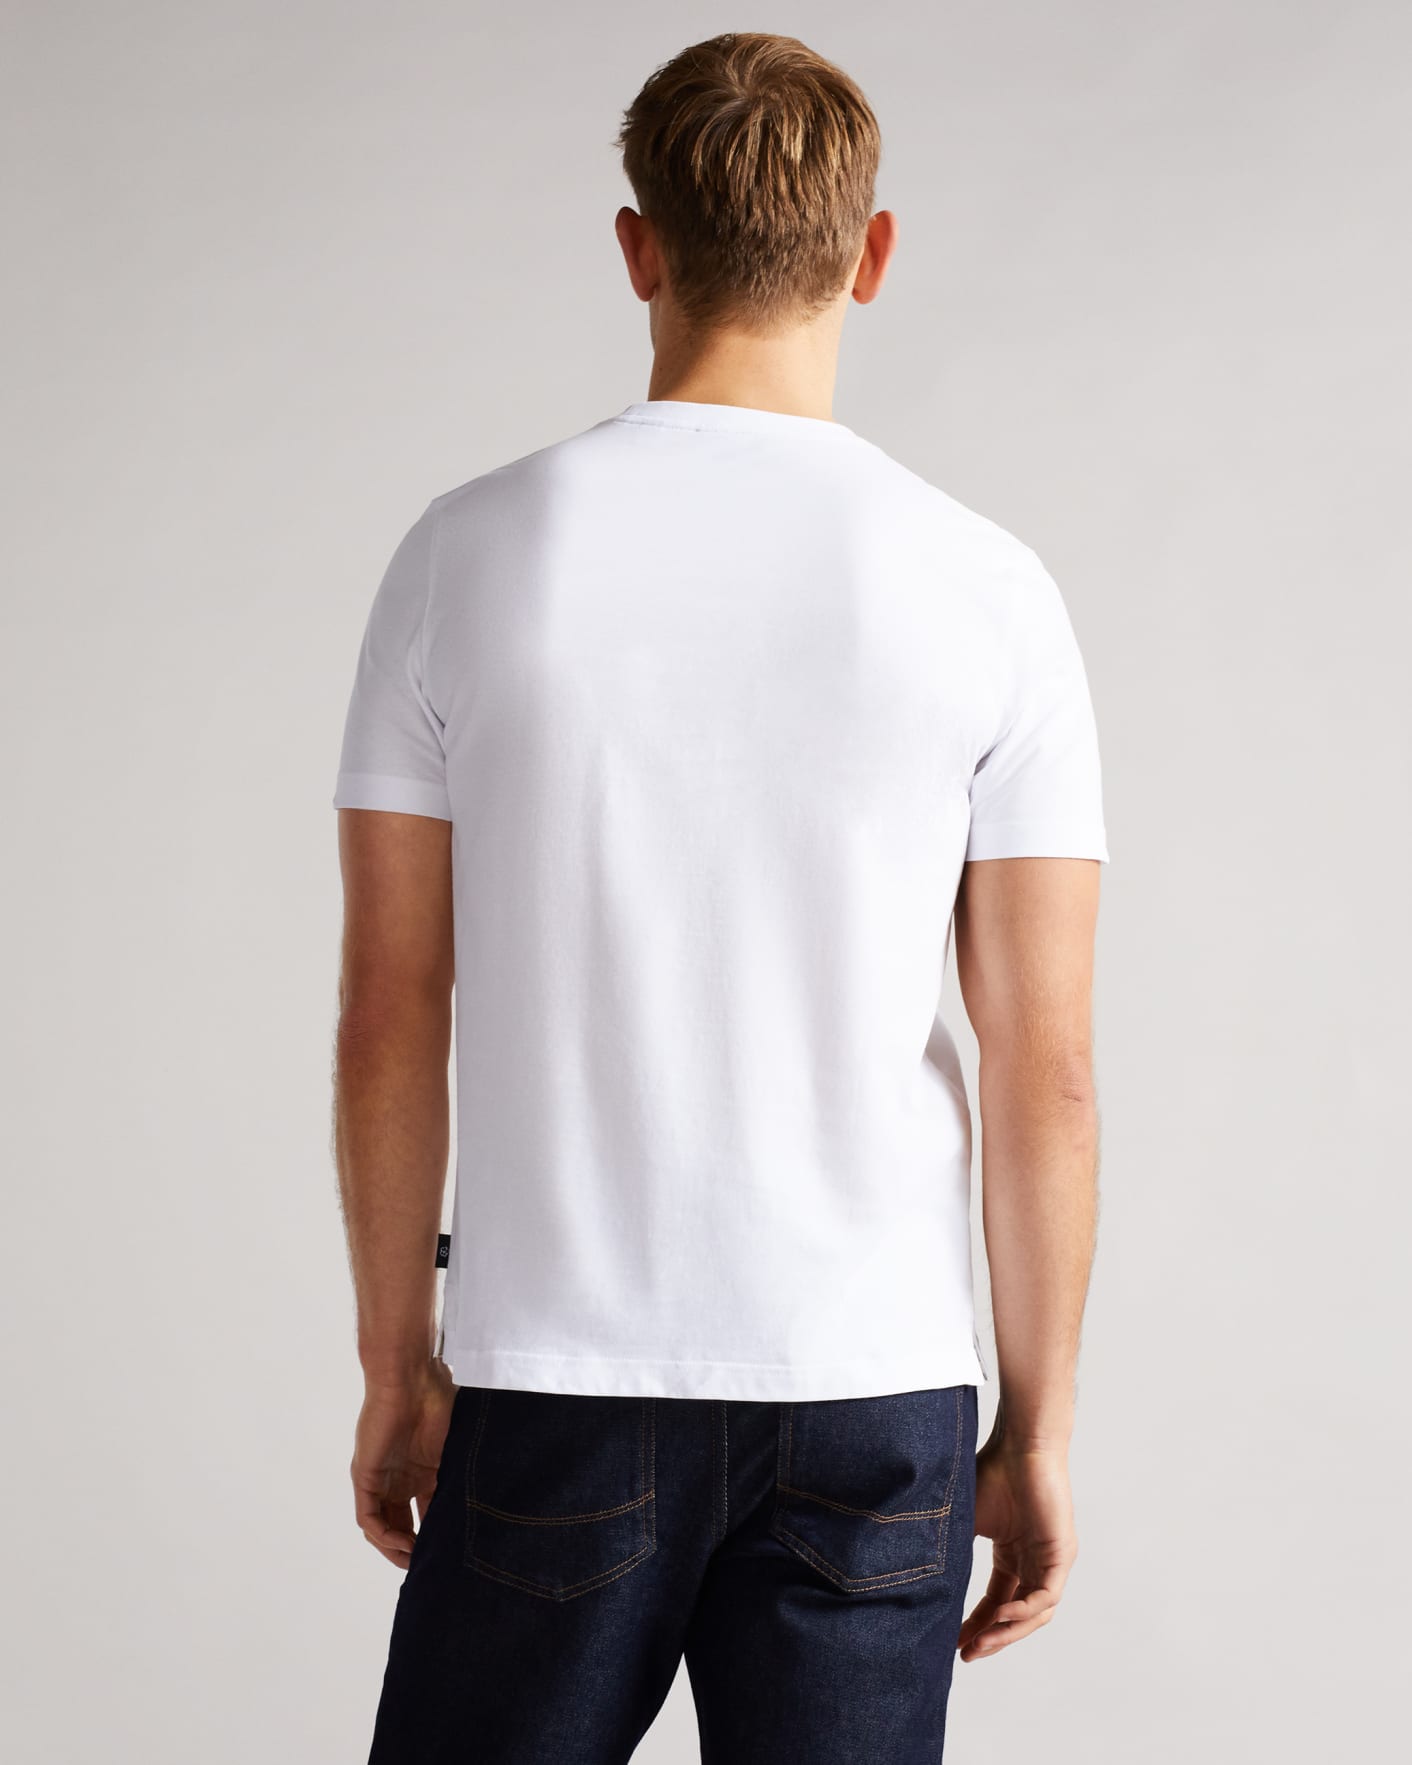 White Short Sleeve Car Graphic Printed T Shirt Ted Baker